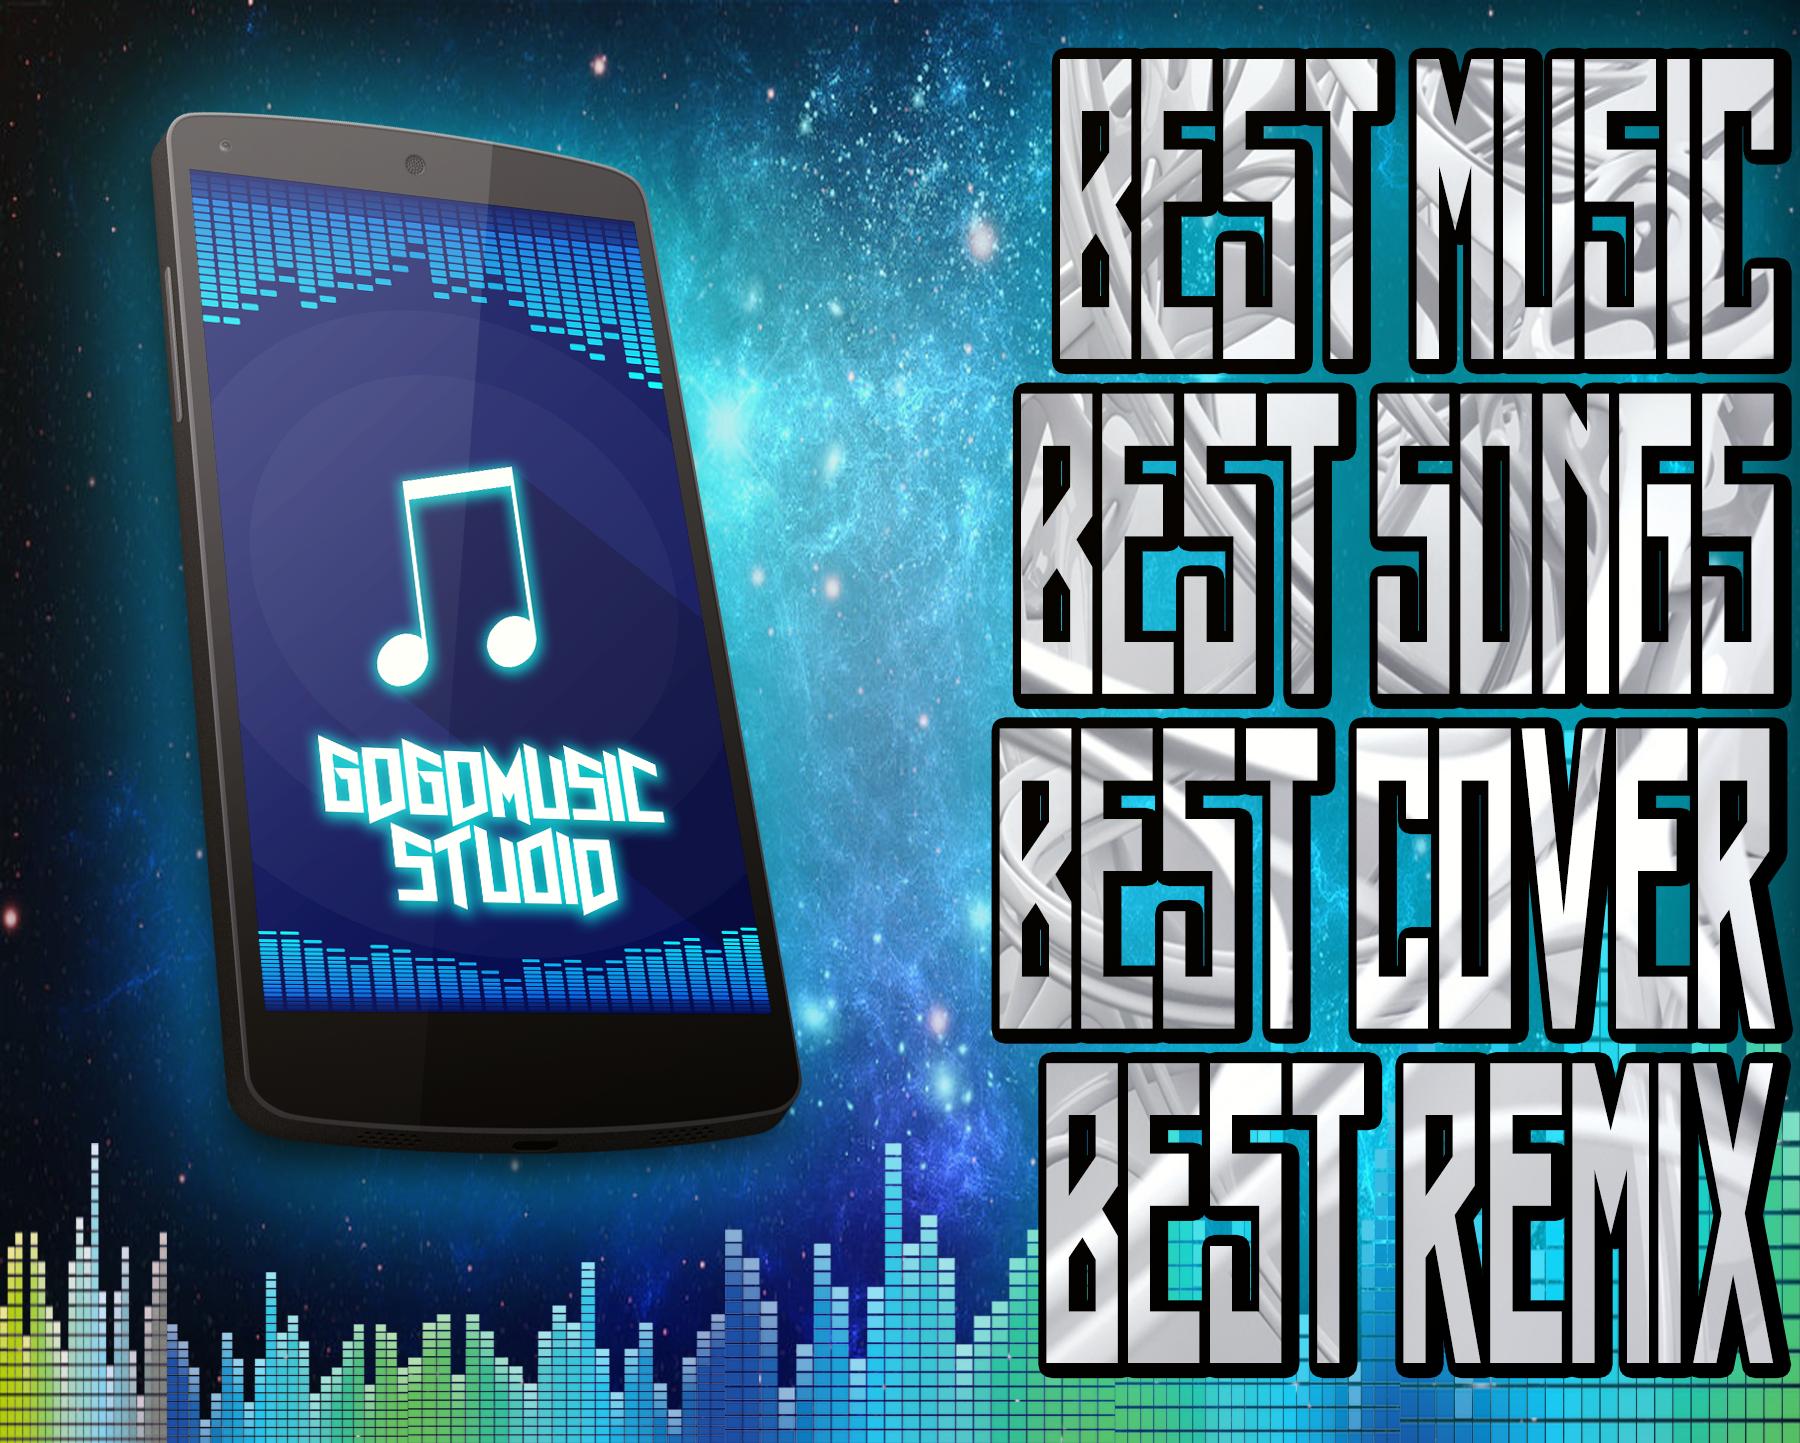 All Songs Logan Paul Santa Diss Track For Android Apk Download